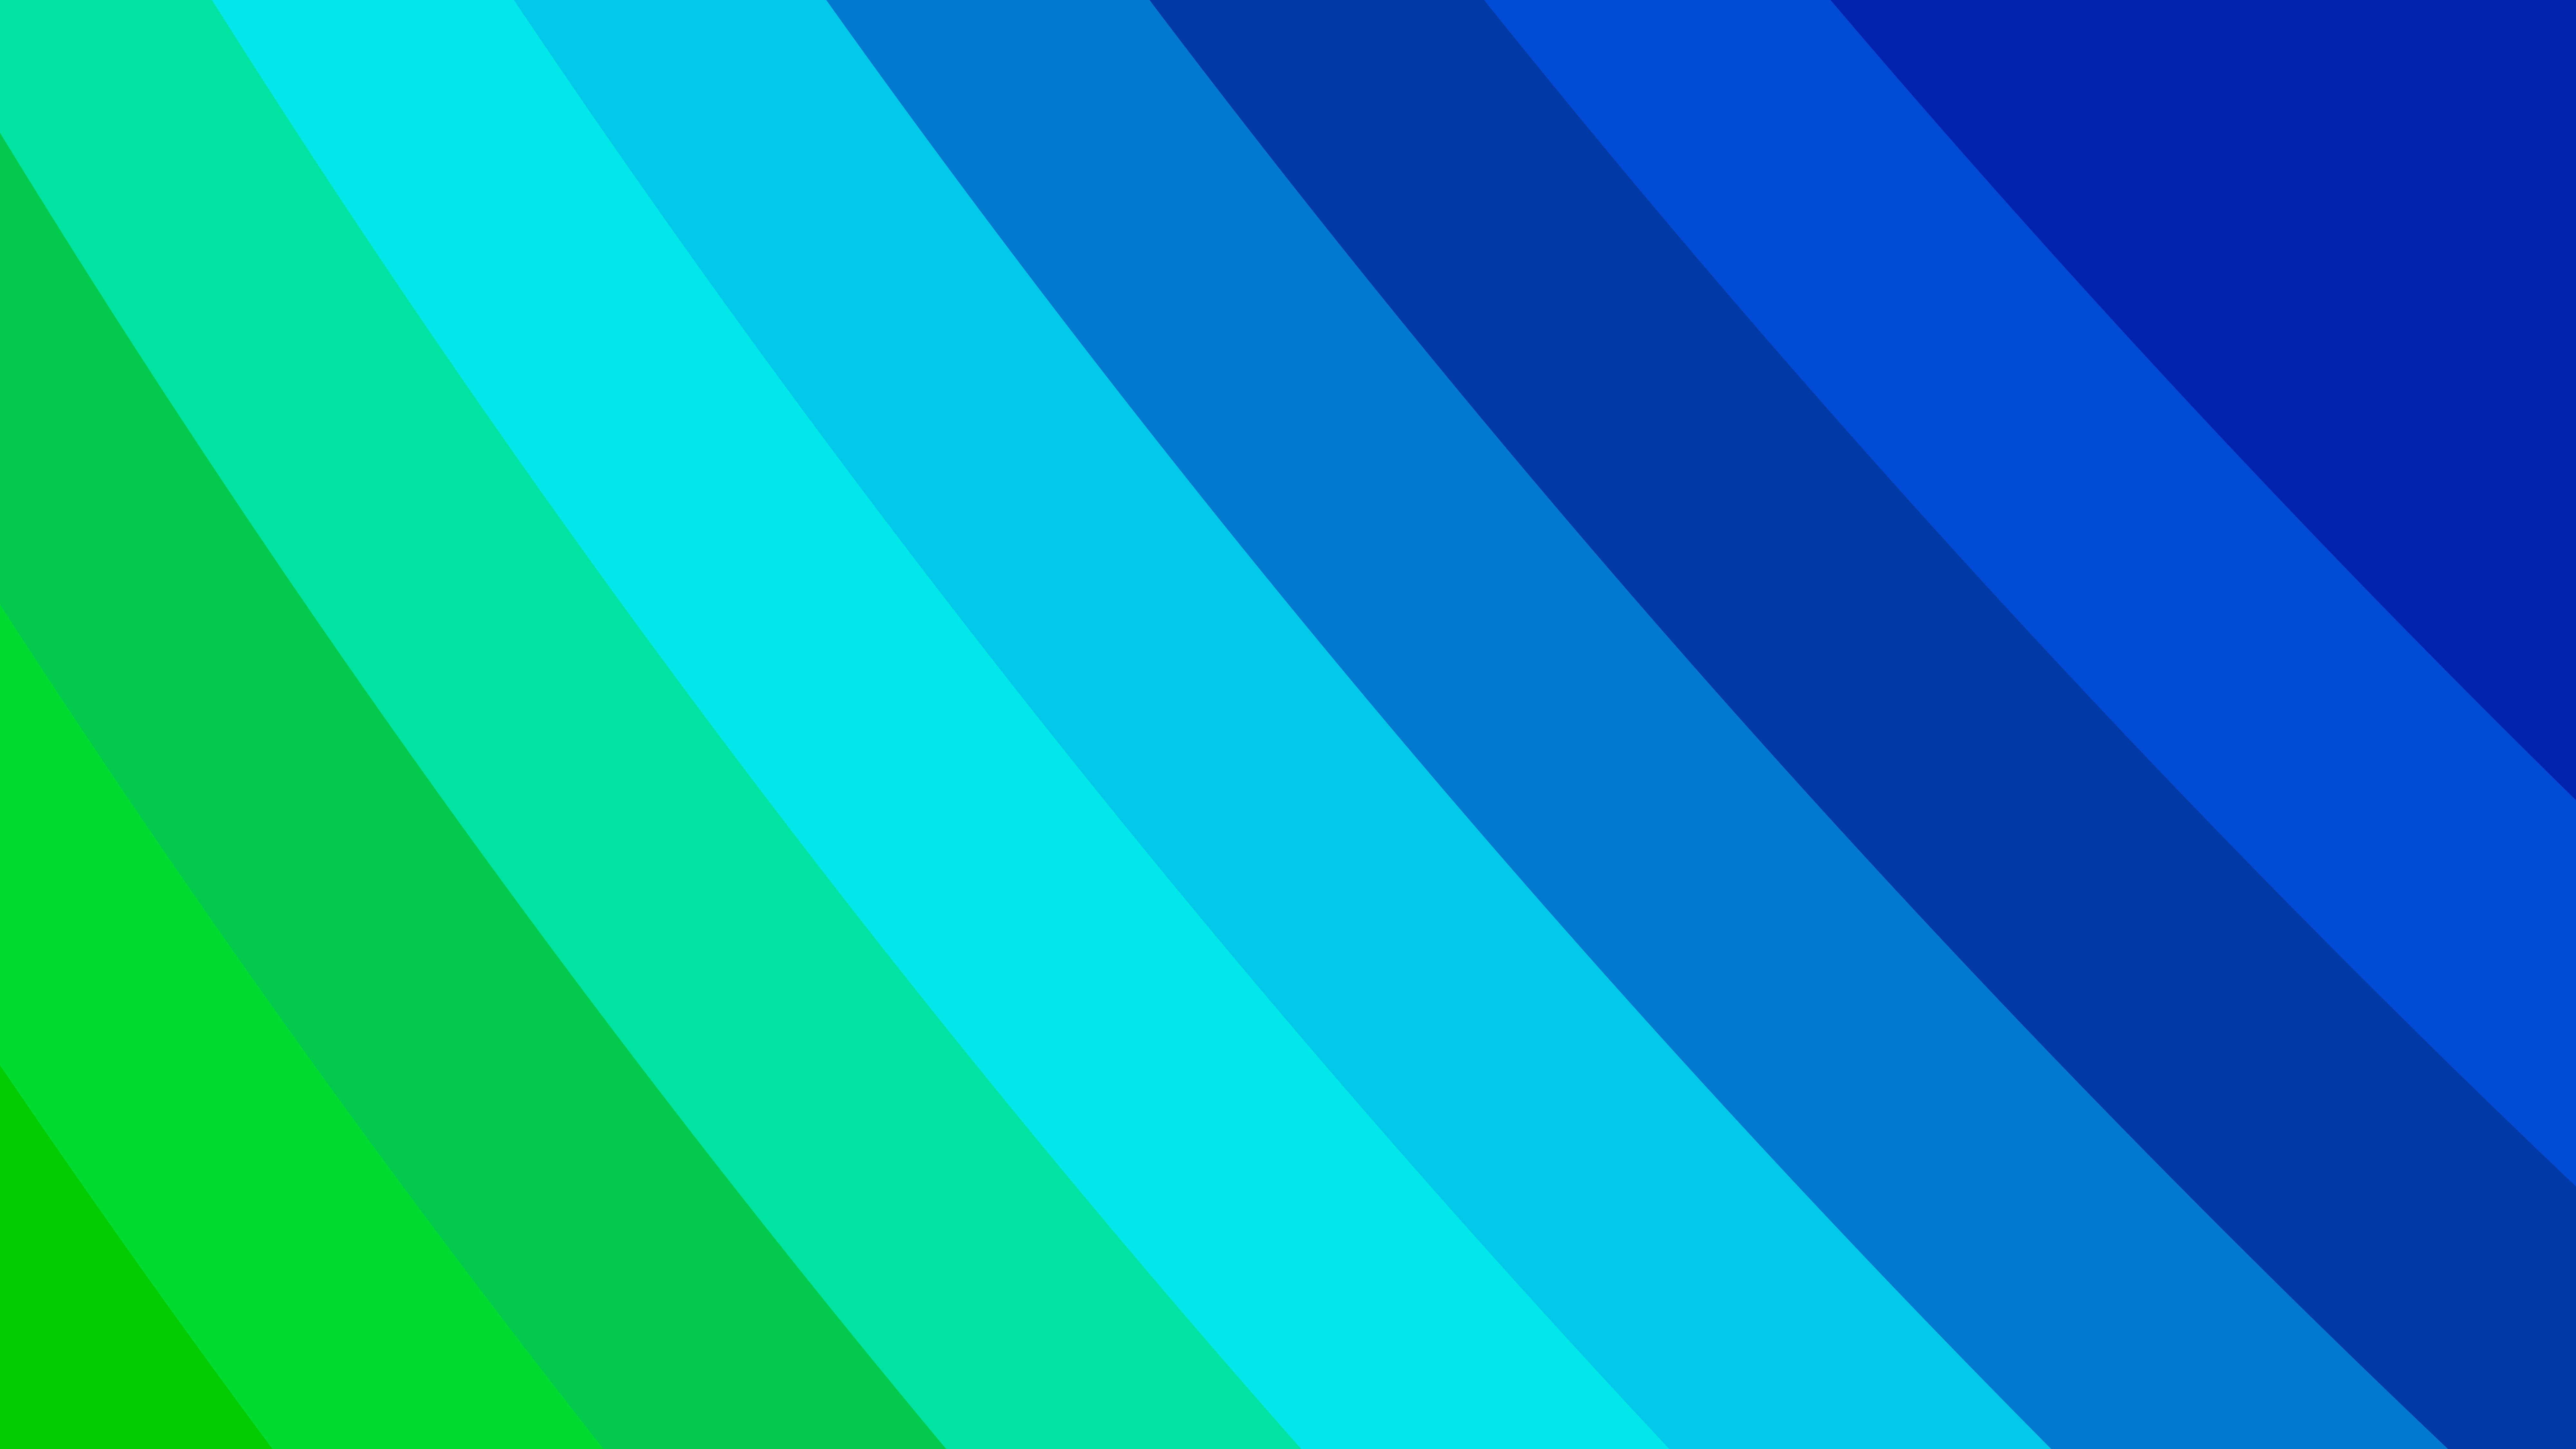 Free Blue and Green Diagonal Stripes Background Illustration